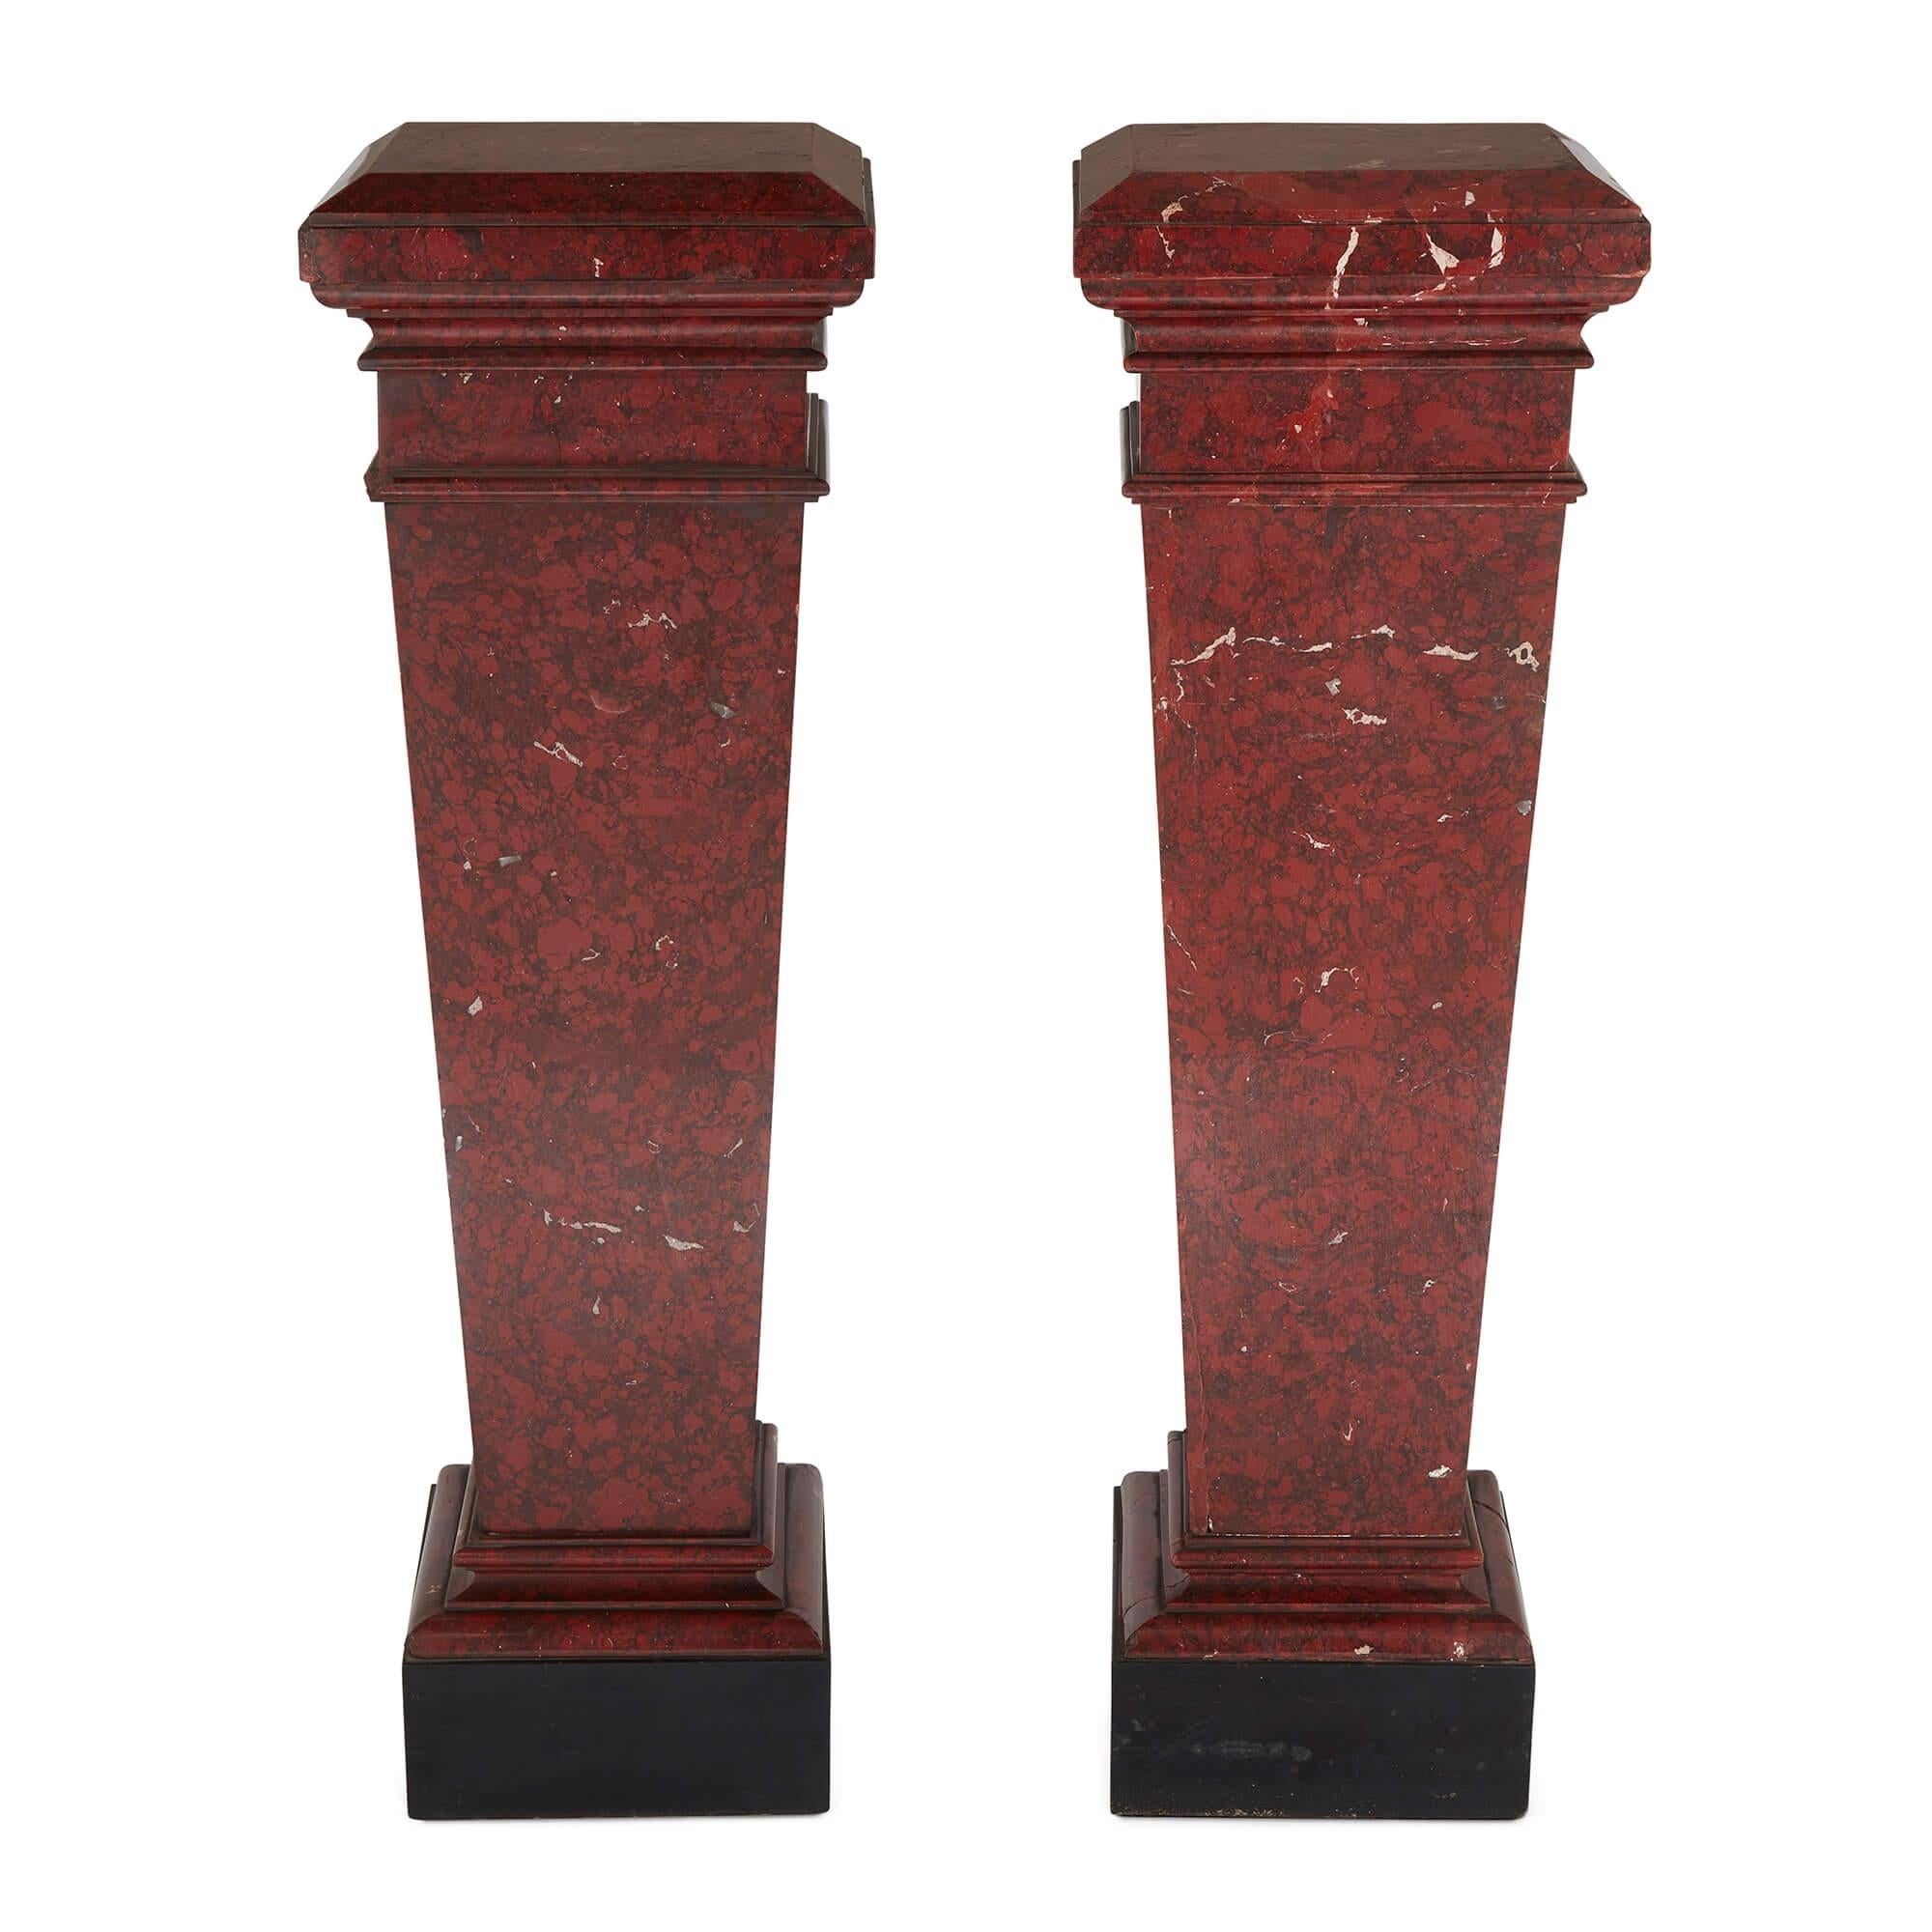 Pair of red marble pedestals in the Neoclassical style
French, 19th Century 
Height 108cm, width 33cm, depth 33cm

Crafted in France during the 19th century, this refined pair of pedestals are ideal for the display of precious objects or works of